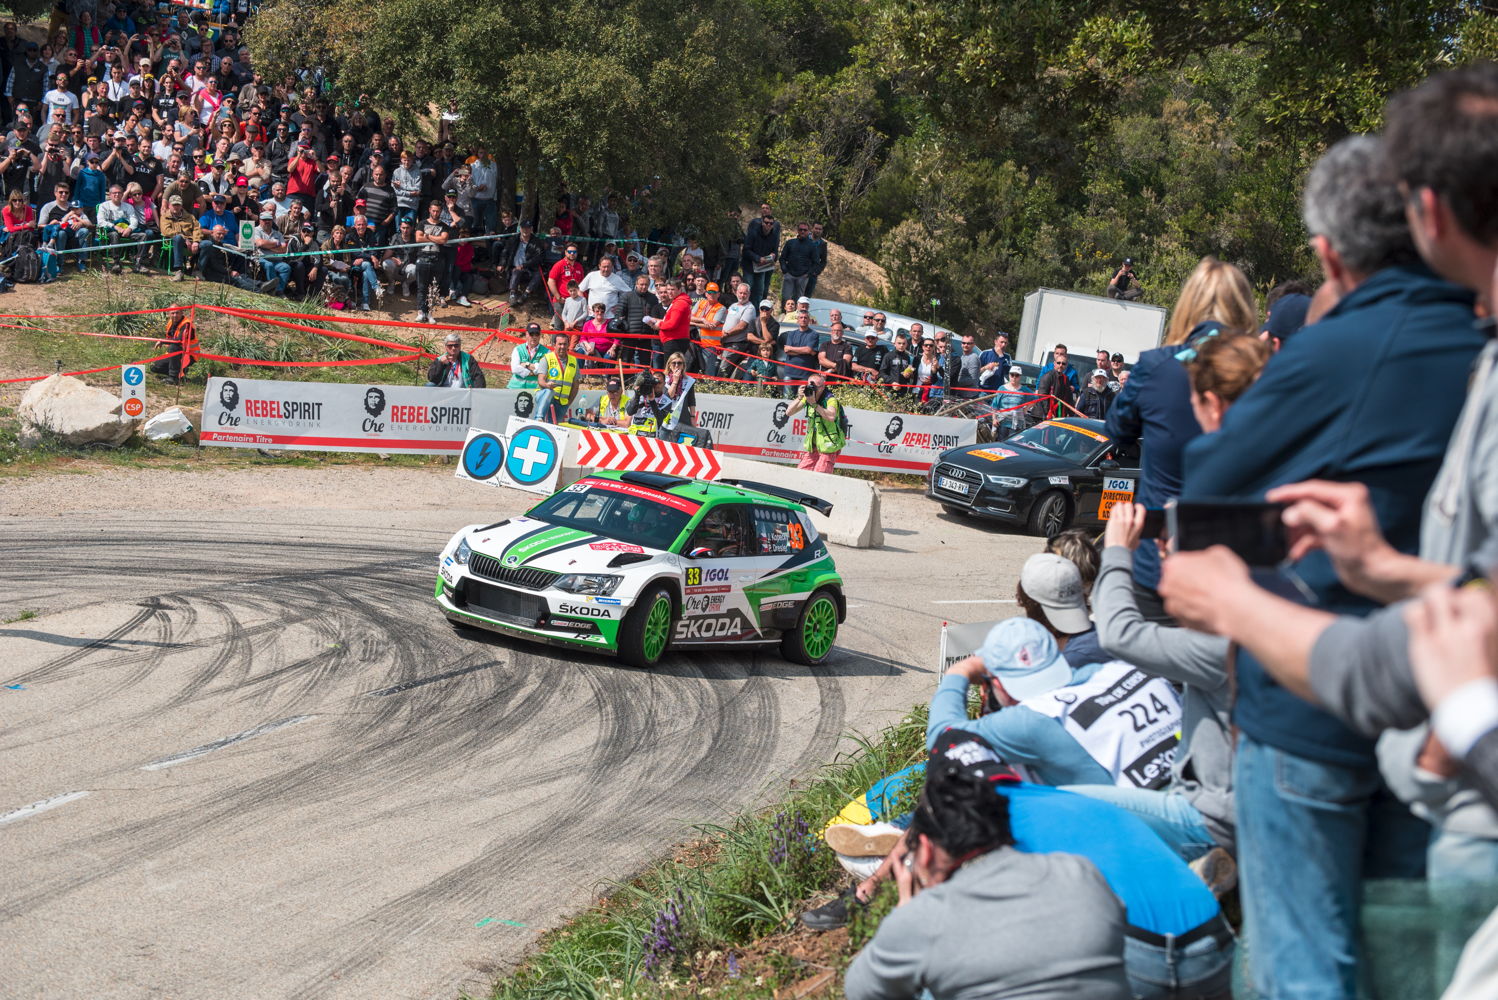 Jan Kopecký/Pavel Dresler (CZR/CZR), competing in a ŠKODA FABIA R5, want to conquer the lead in the WRC 2 overall standings by winning in Corsica.